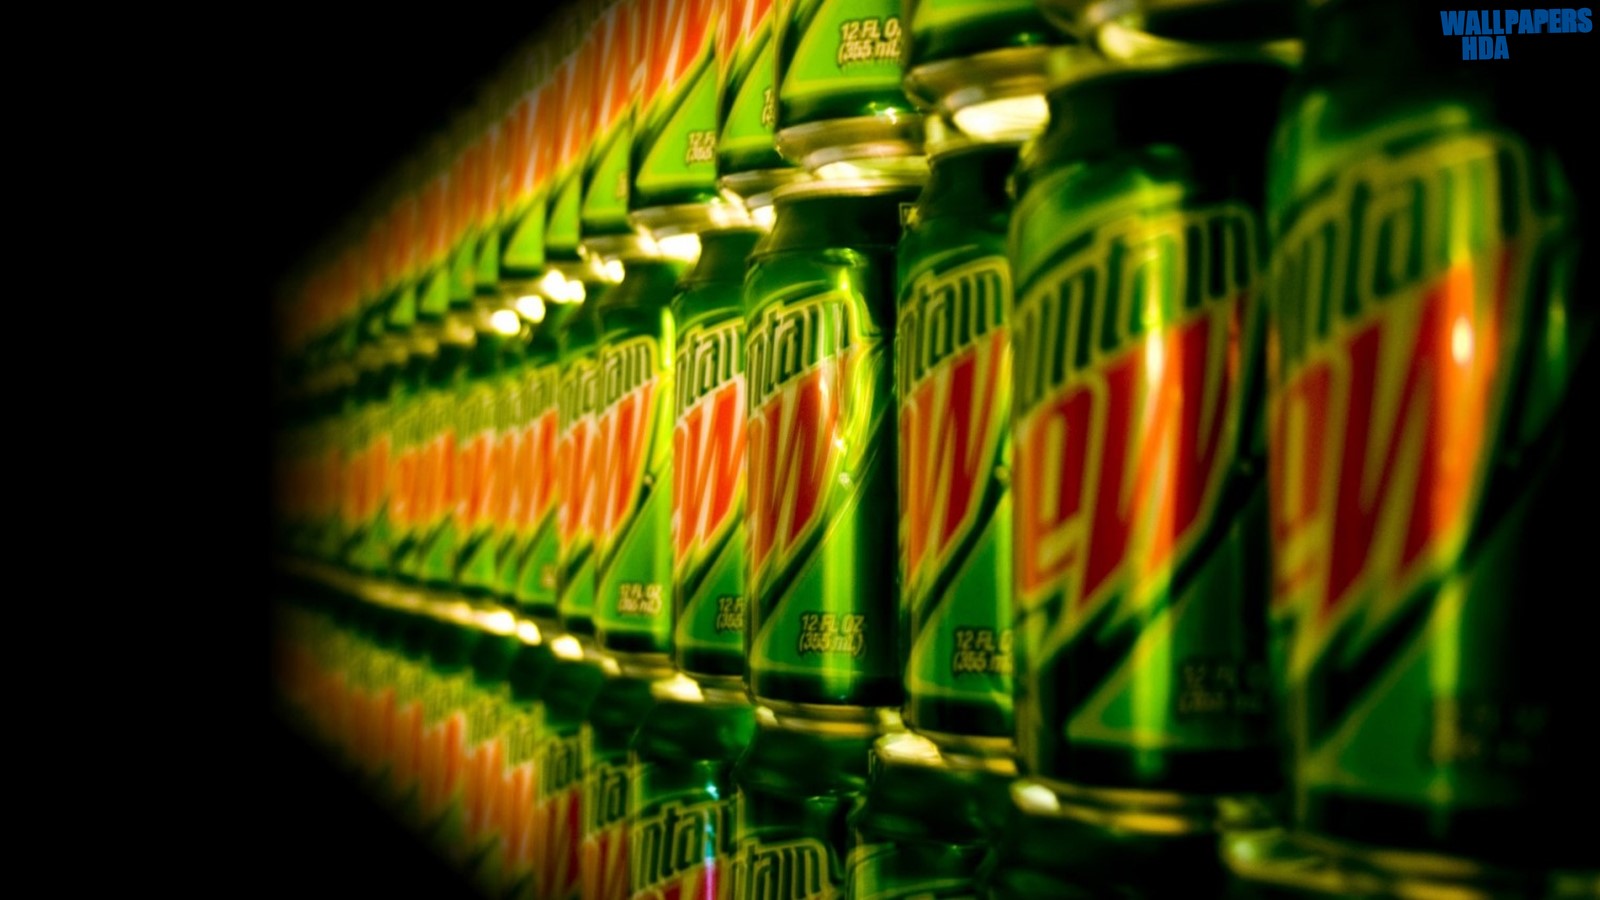 Mountain dew cans wallpaper 1600x900